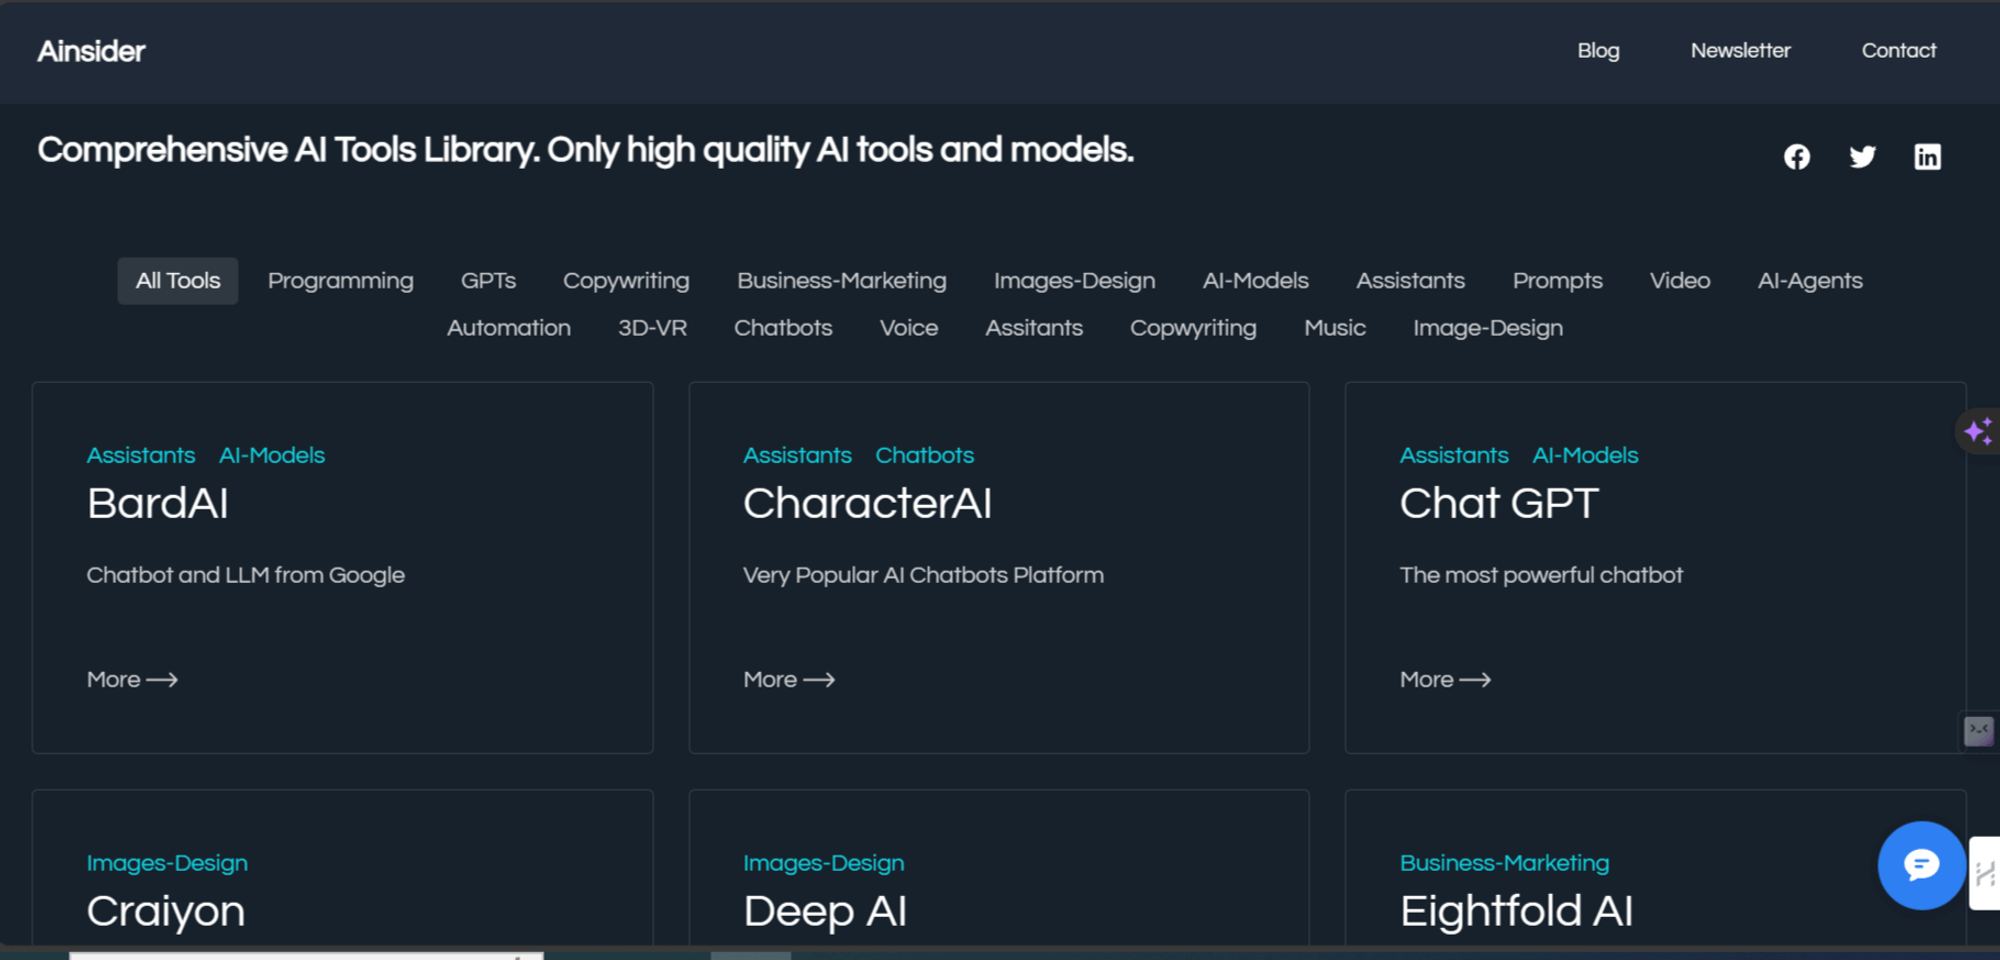 Ainsider.tools AI library launched!